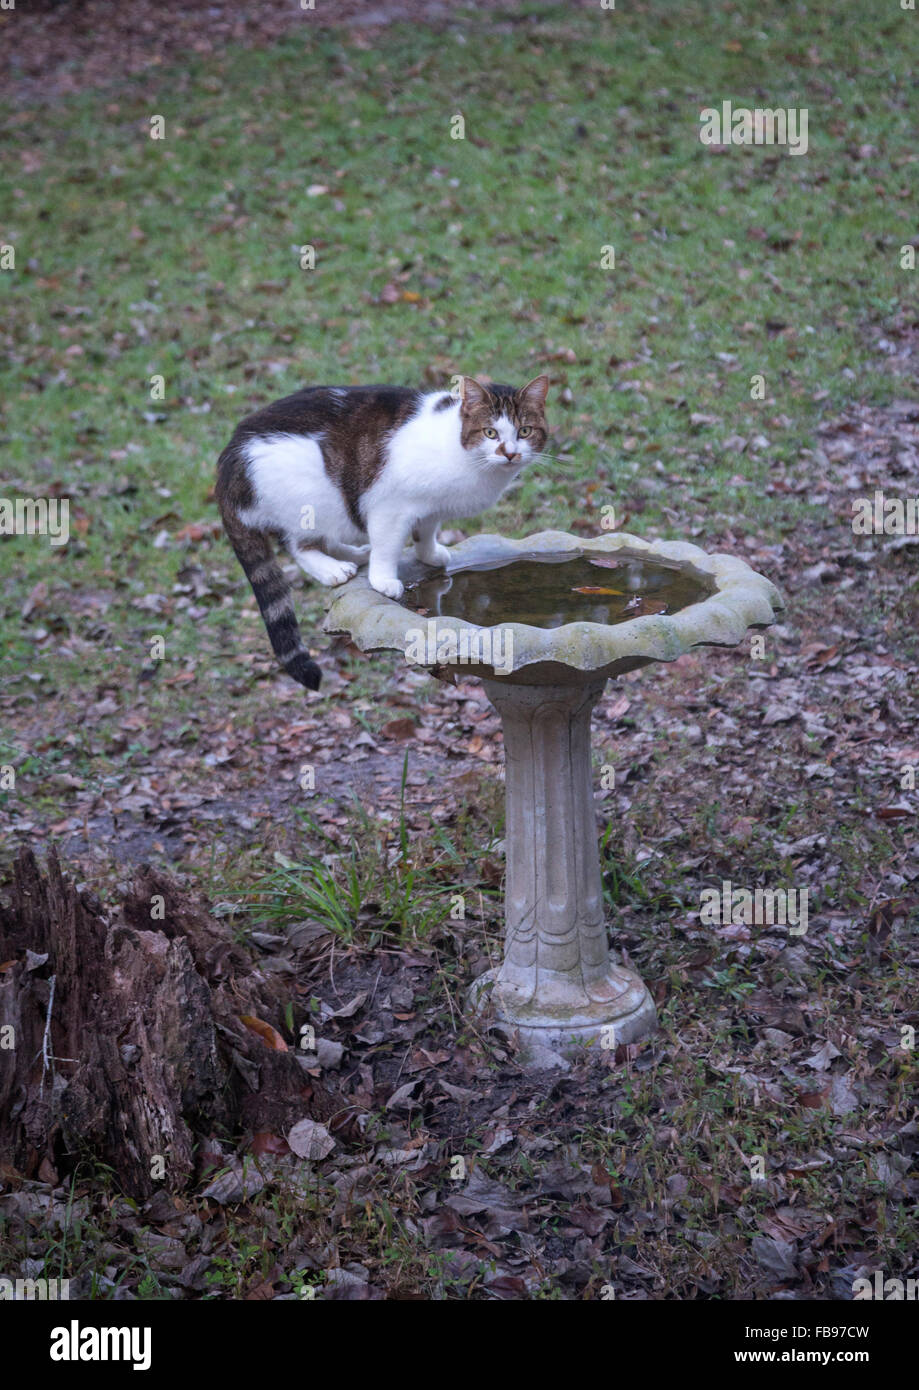 Cat stands on bird bath to get drink of water. Stock Photo